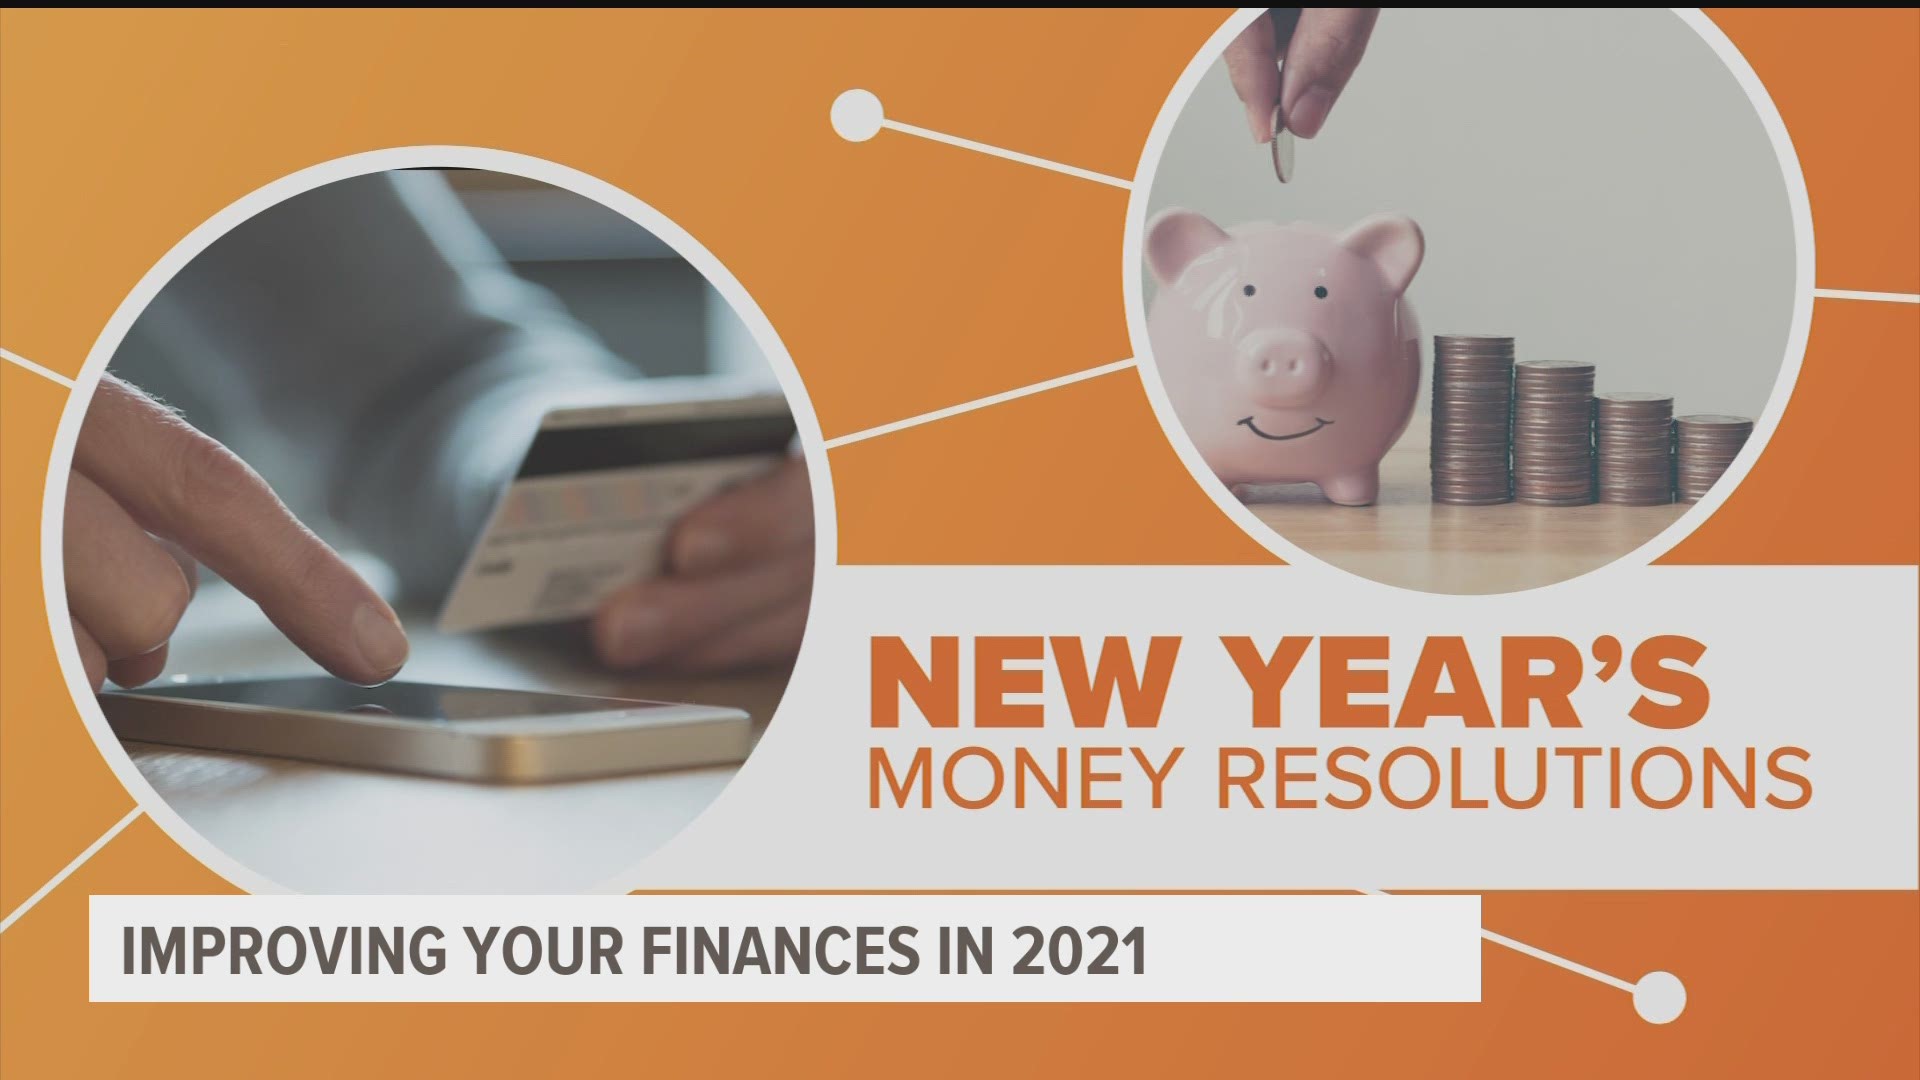 The New Year’s resolutions that can improve your financial health.